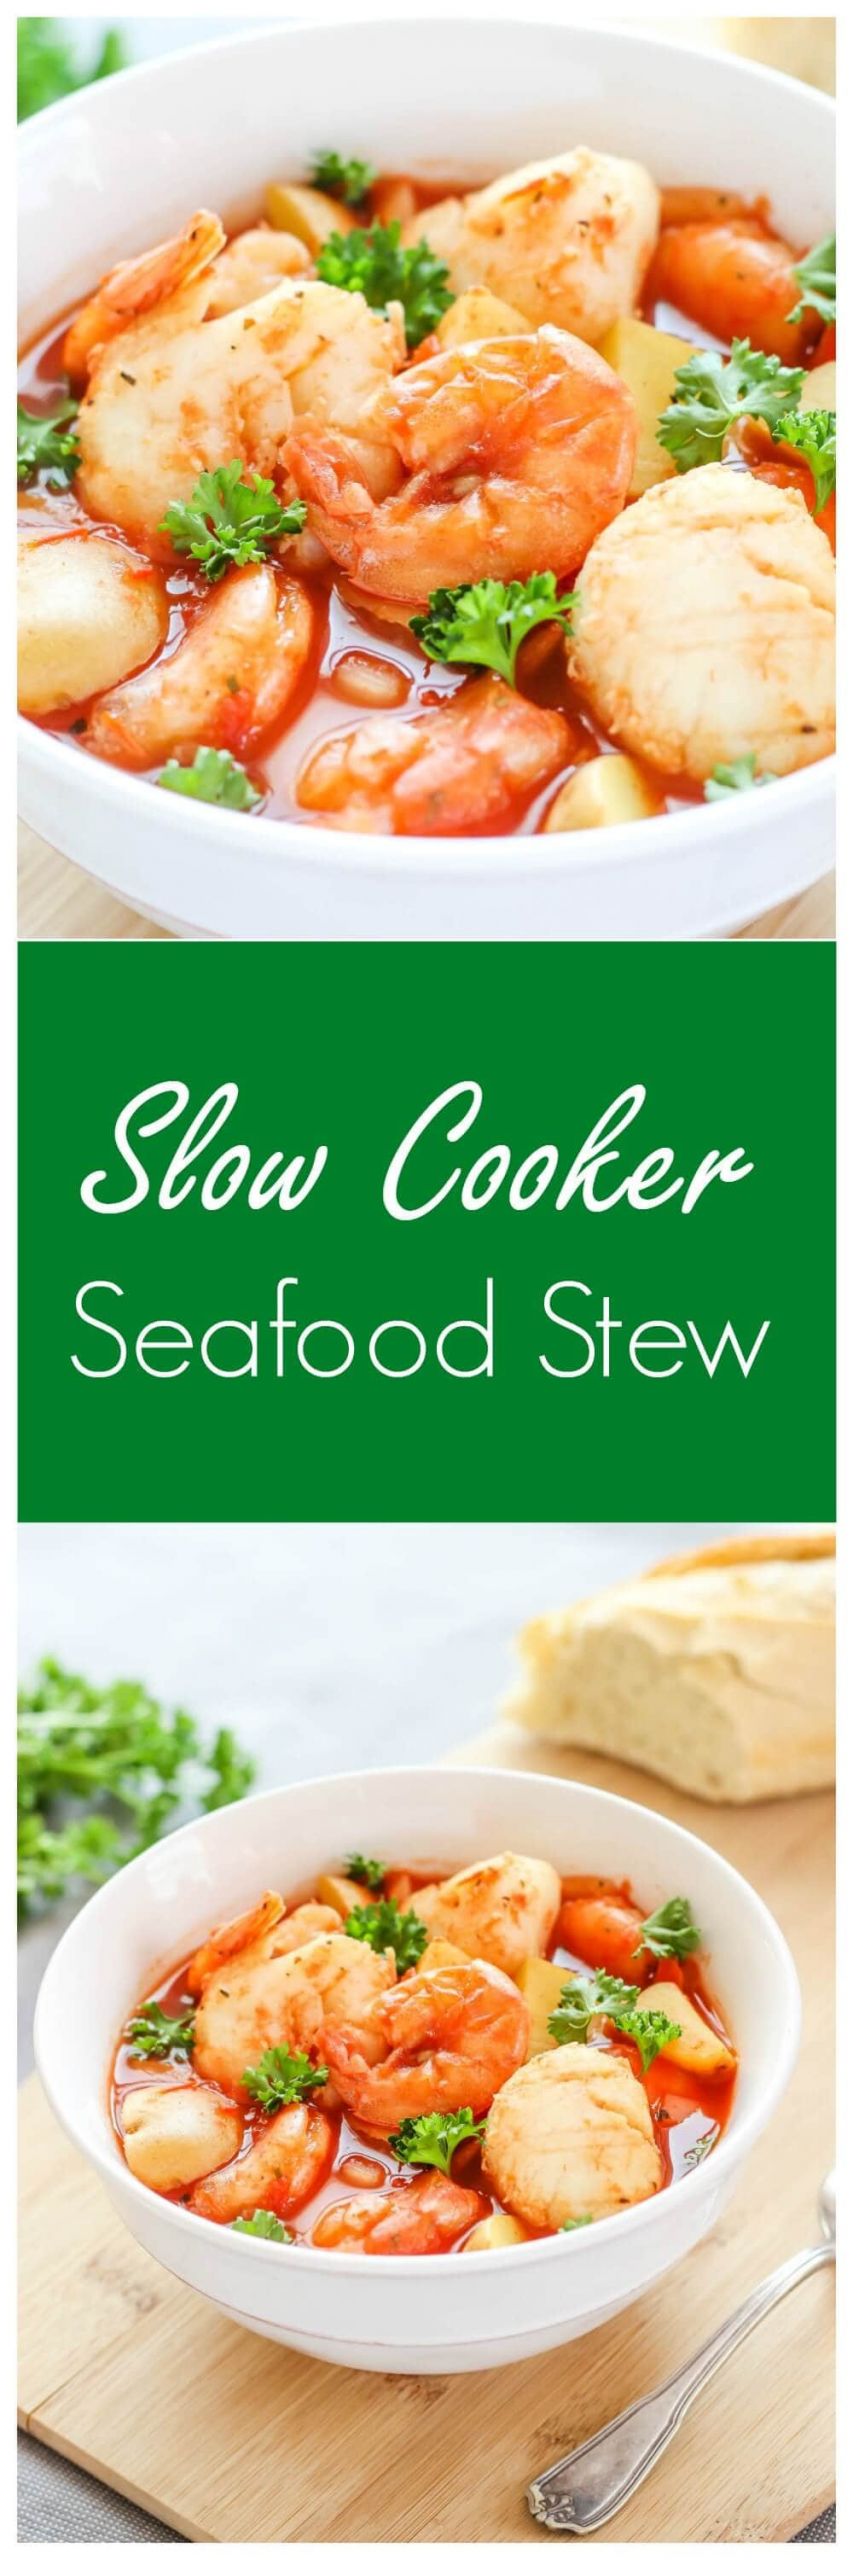 Seafood Stew Names
 Slow Cooker Seafood Stew I Heart Nap Time